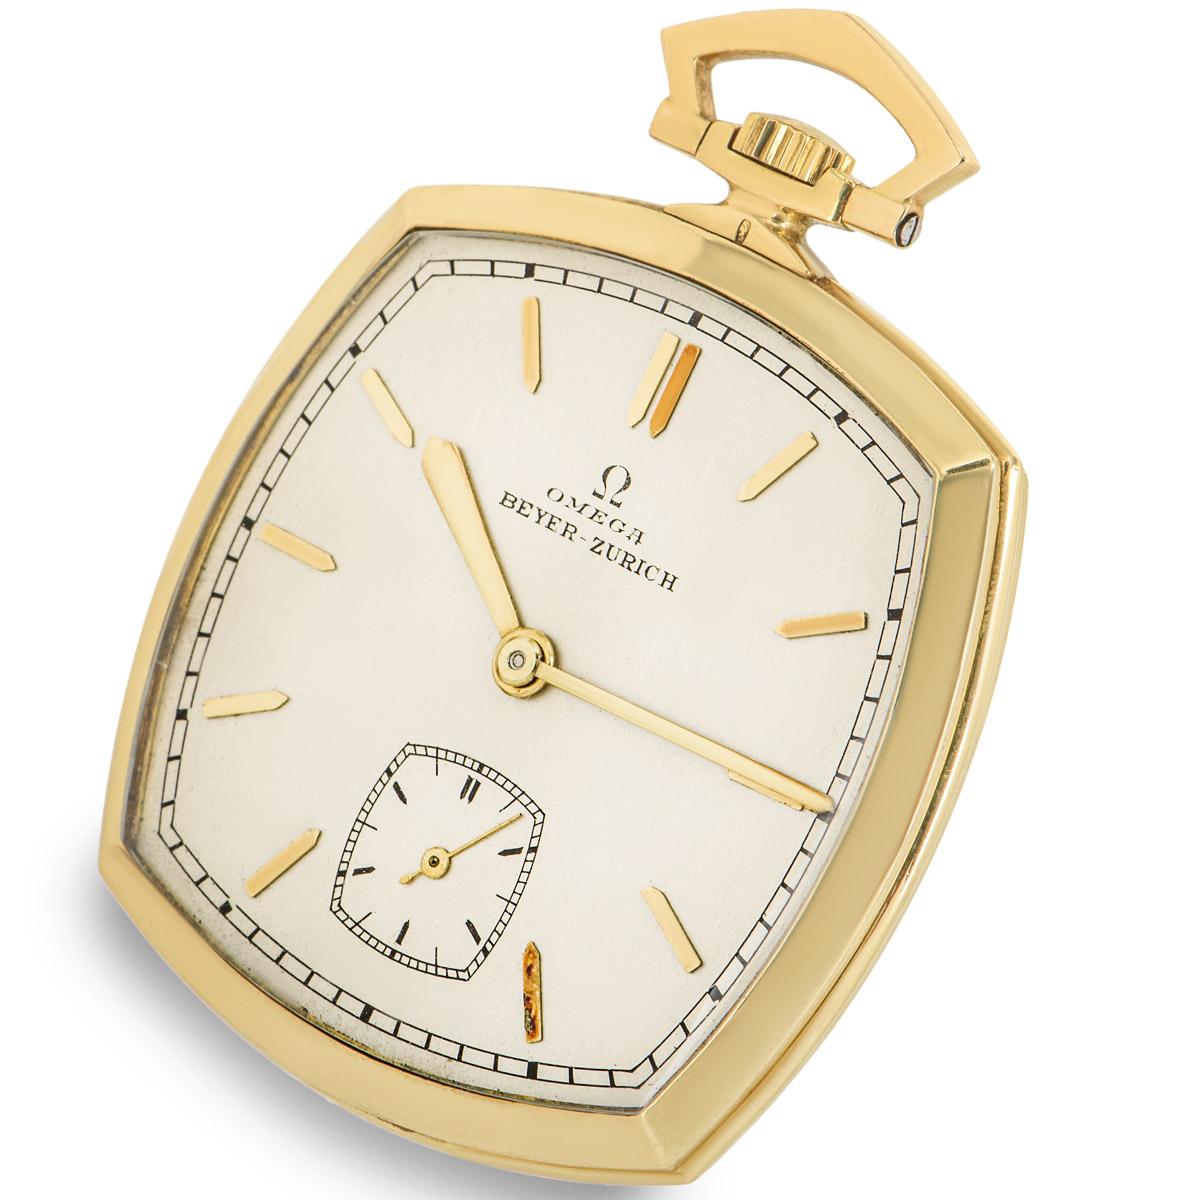 A rare Omega yellow gold double signed square open face pocket watch, C1930.

Dial: The beautiful original silver dial double signed Omega Beyer- Zurich who was the retailer. The unusual gold spade like hands with gold batons and subsidiary seconds